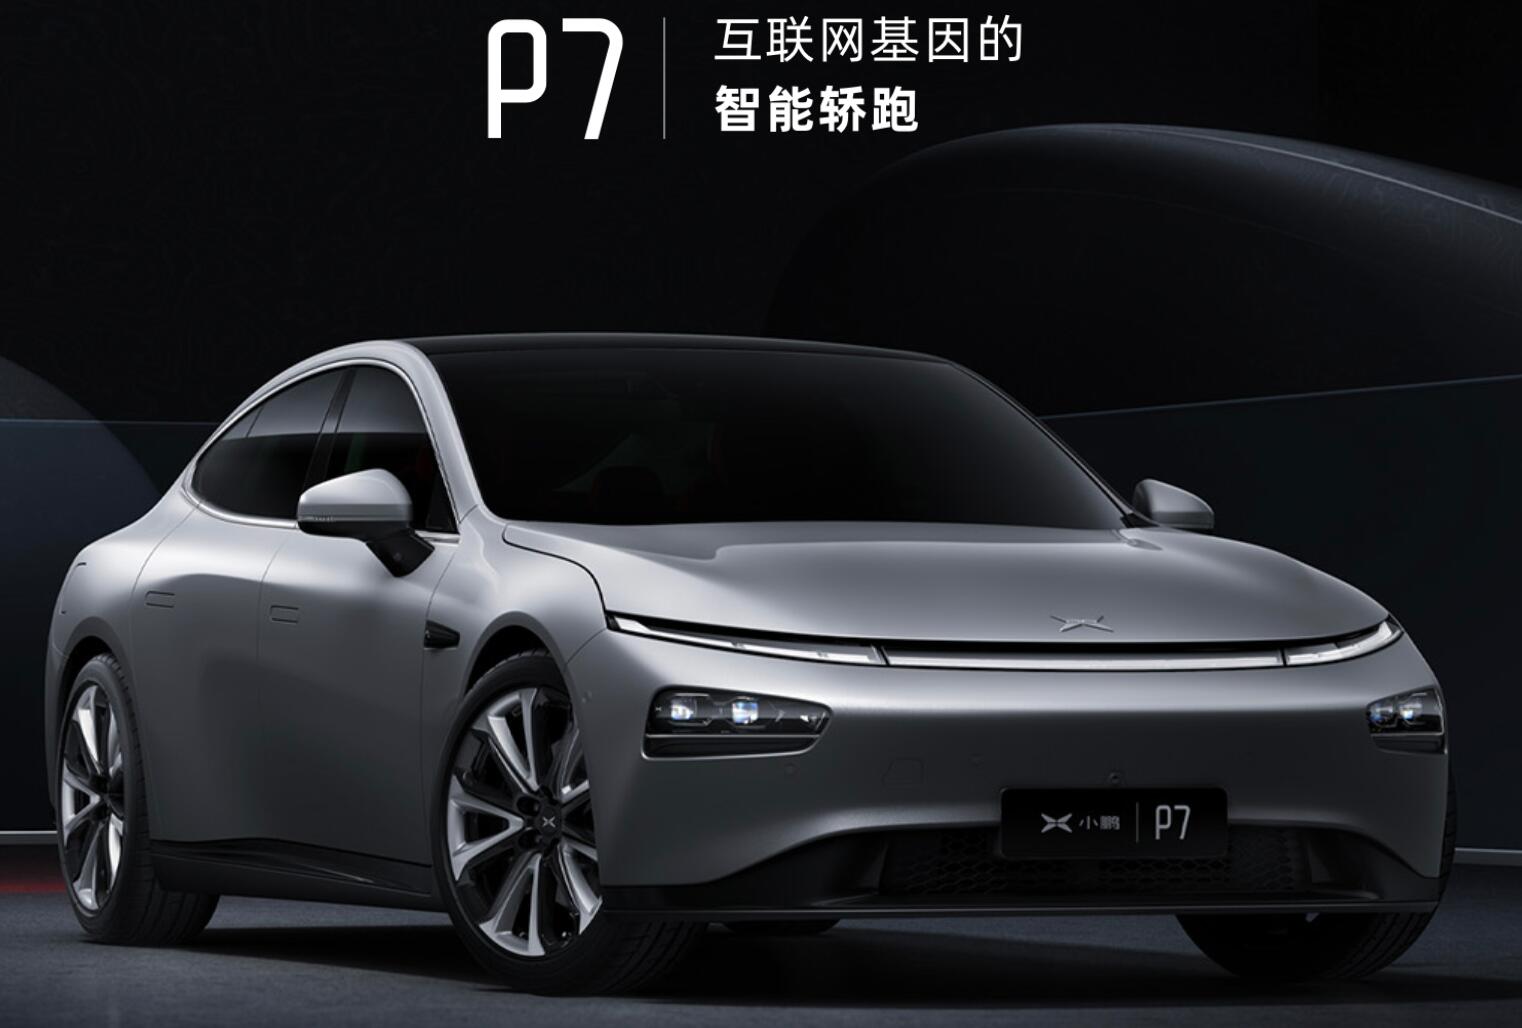 Xpeng P7 has a range of 552km-706km, latest info shows-CnEVPost